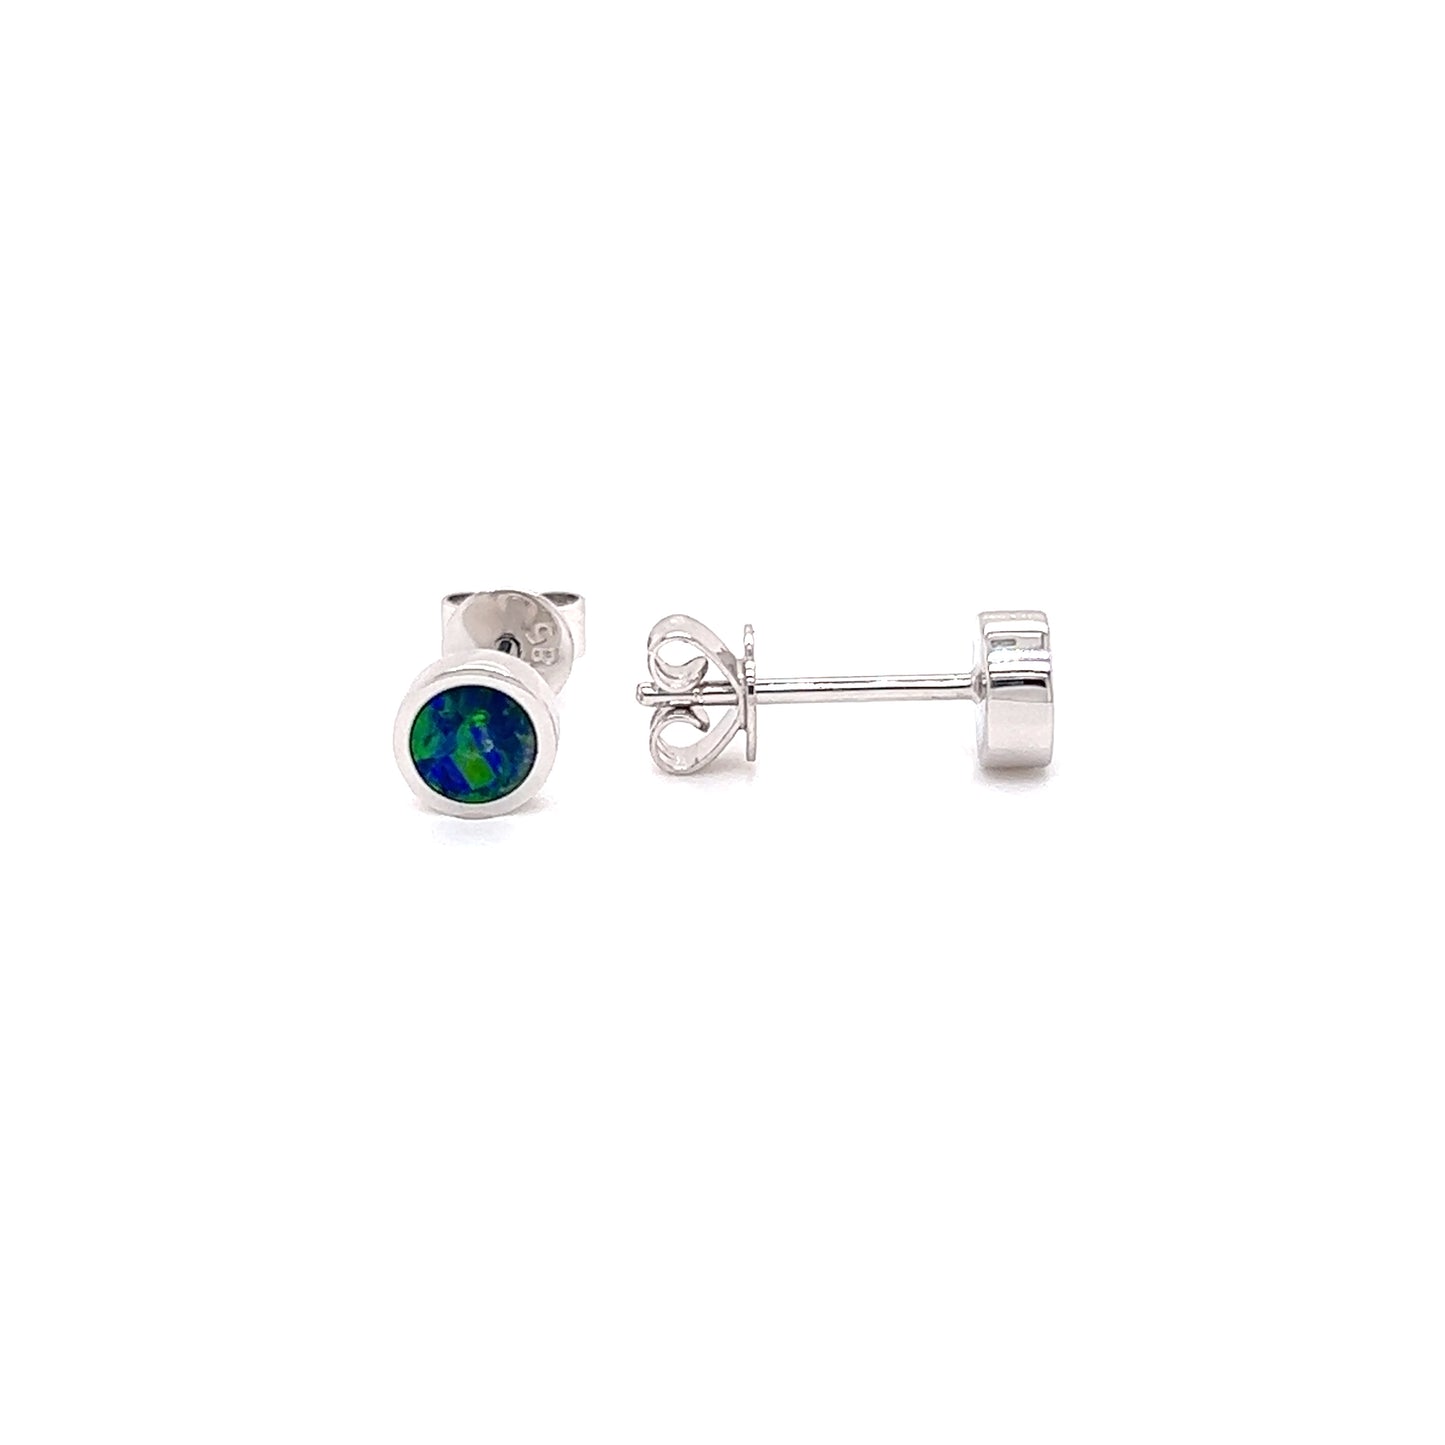 Black Opal Stud Earrings in 14K White Gold Front and Side View